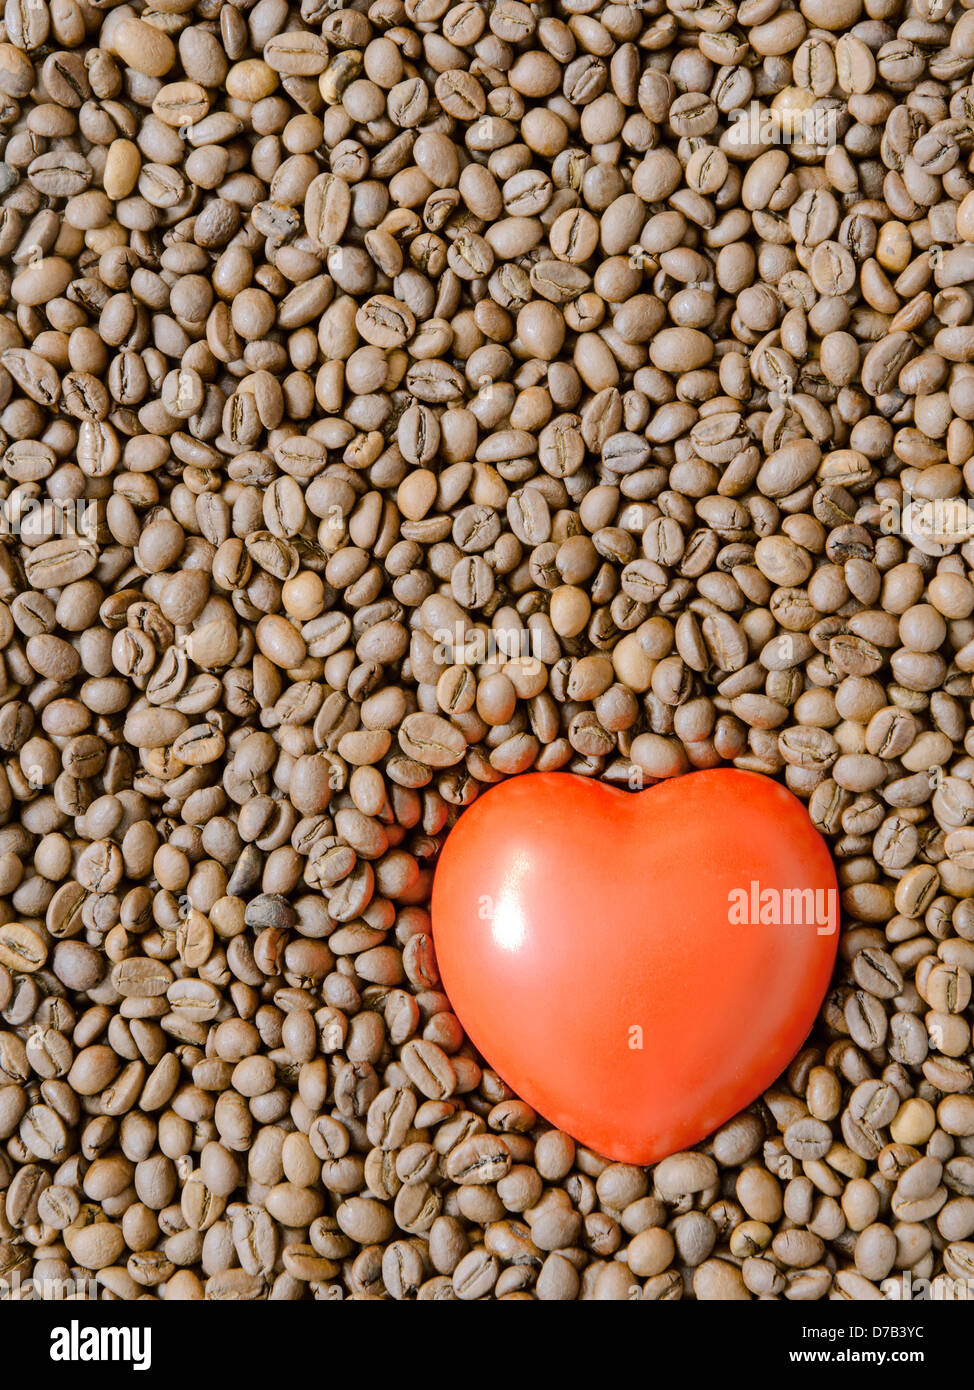 detailed roasted coffee beans background with red heart symbol on it Stock Photo